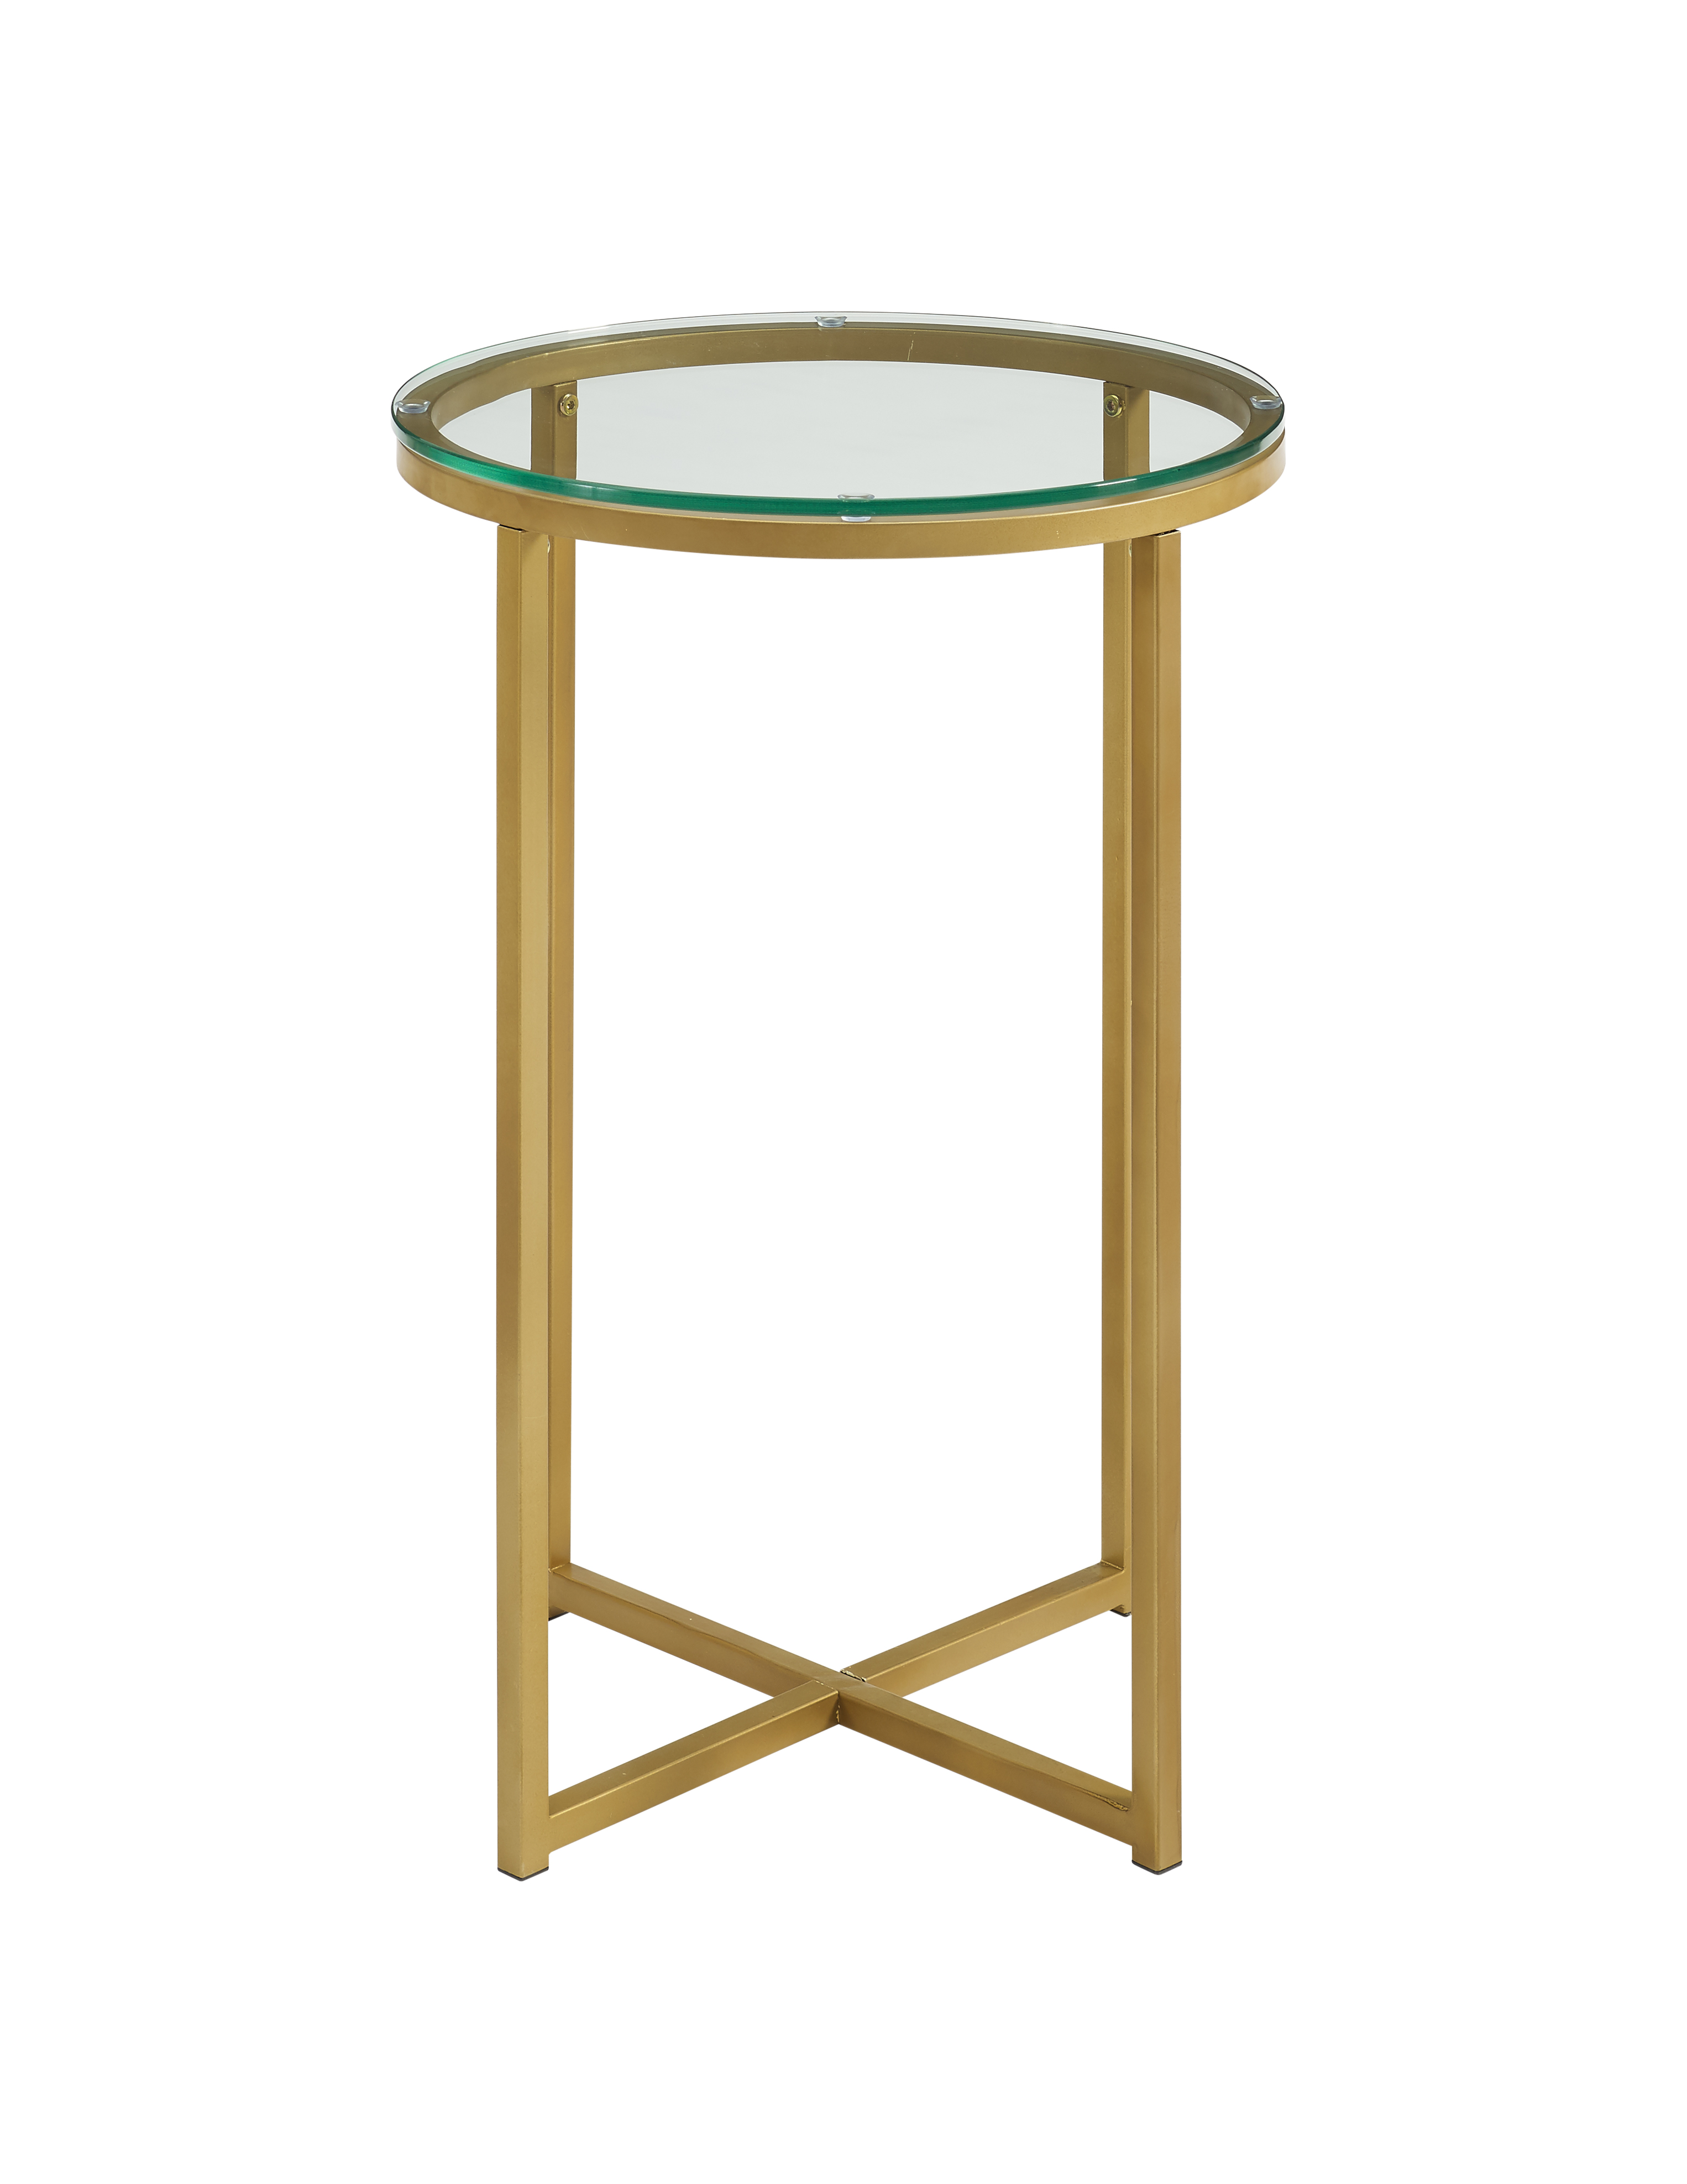 Ember Interiors Modern Glam Round End Table, Glass/Gold - image 3 of 8